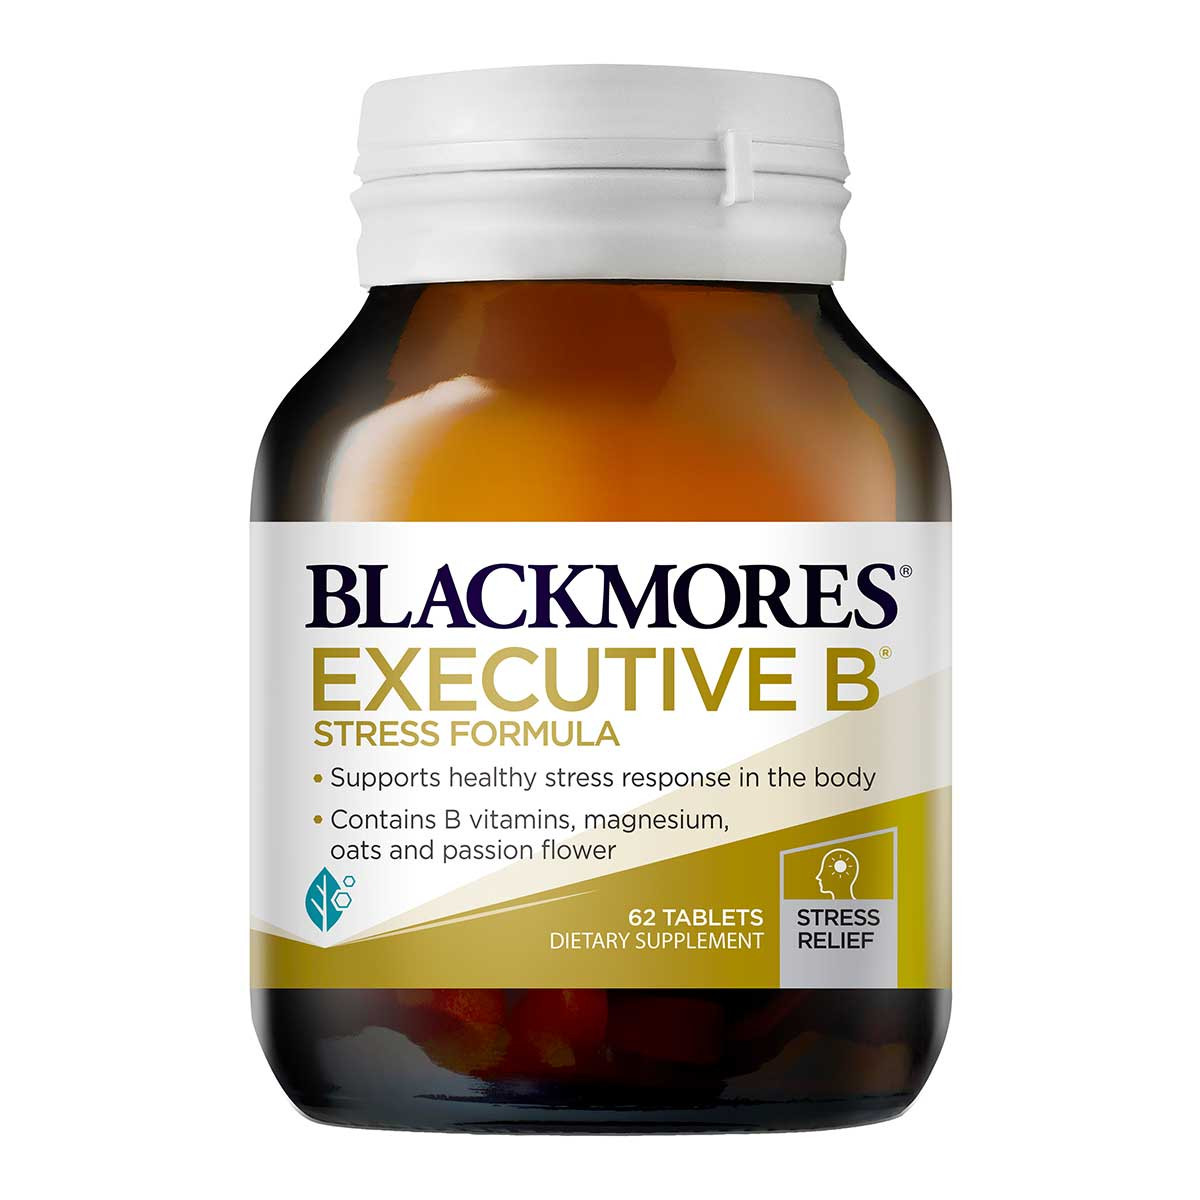 Getting Into The Mood for Exercise - Blackmores